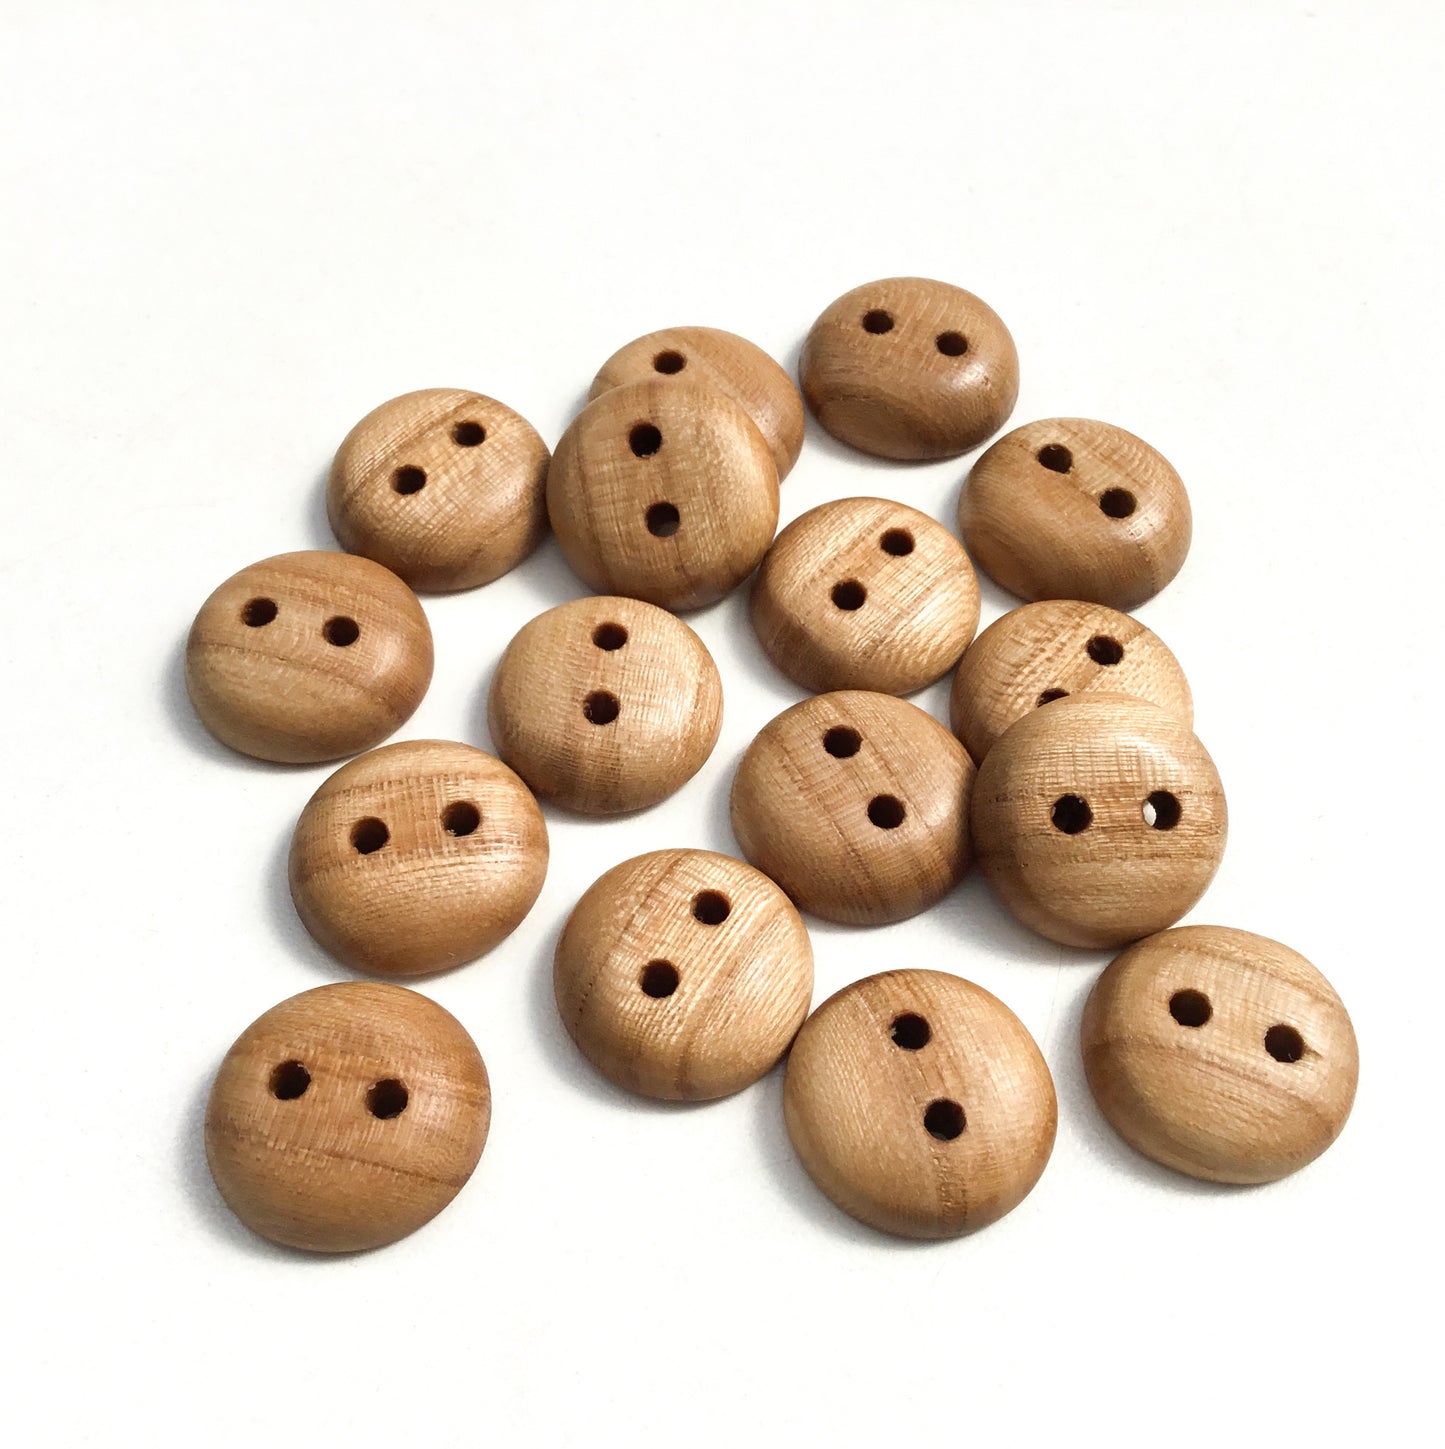 American Elm Wood Buttons - 3/4”